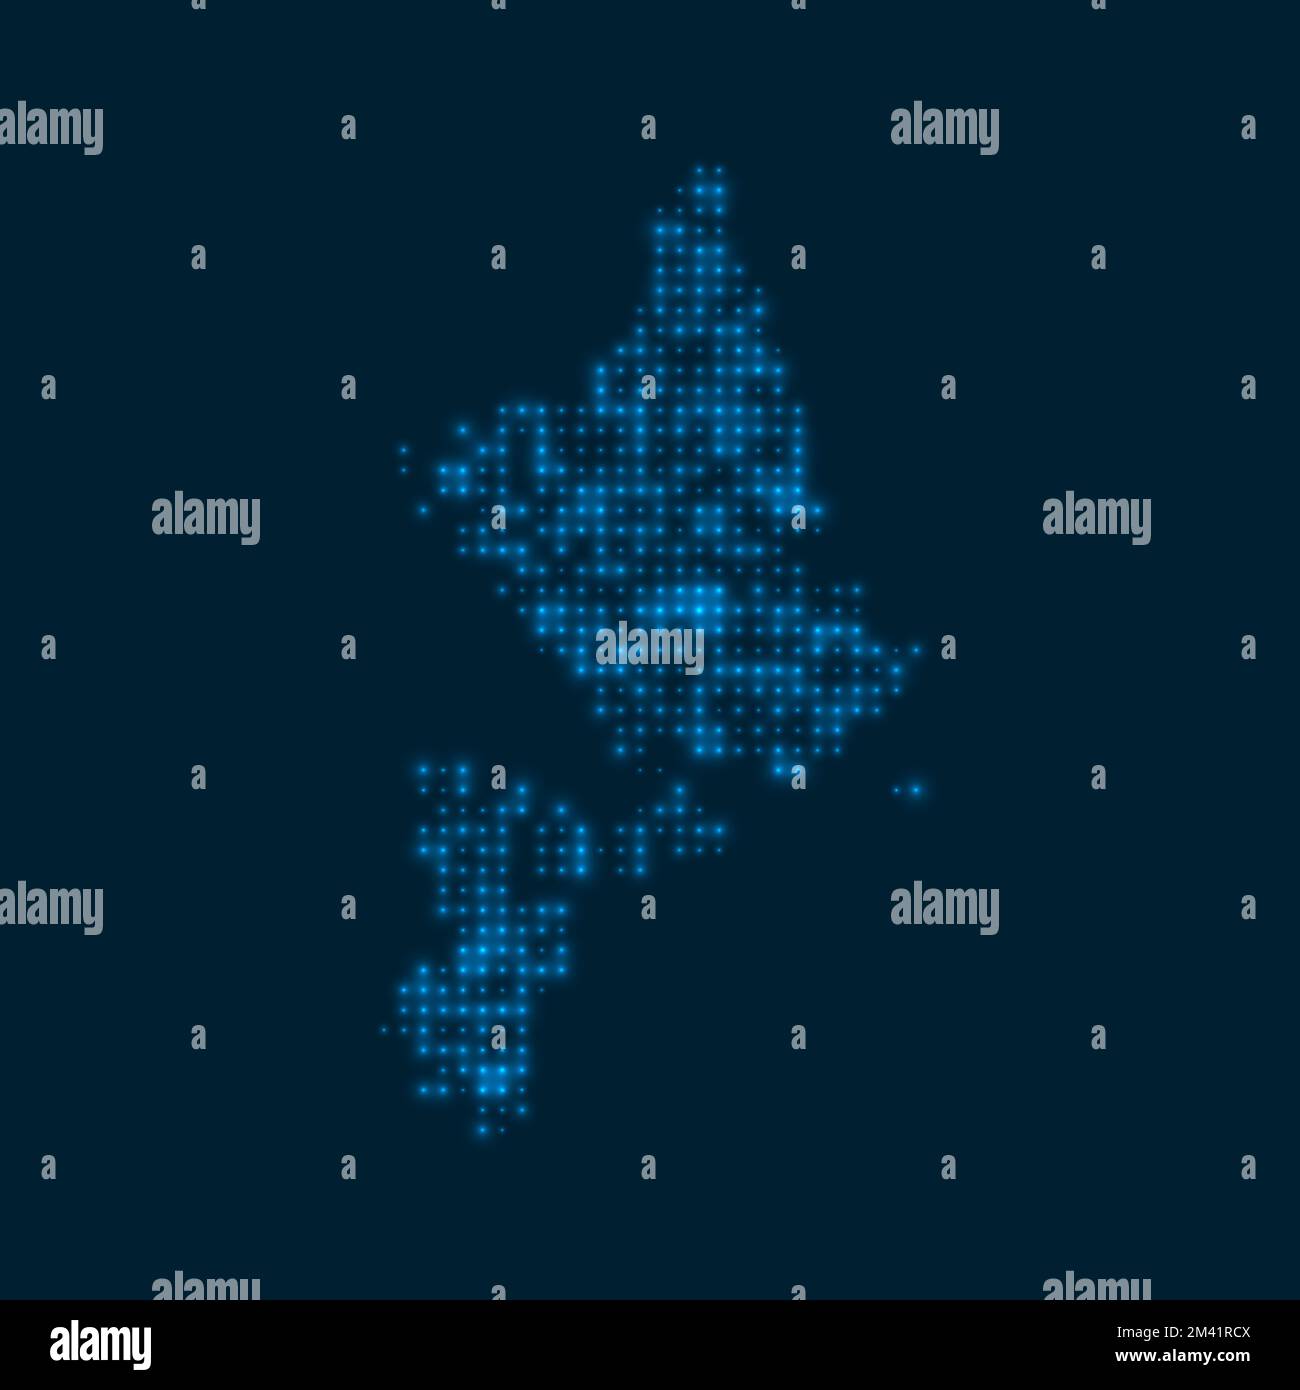 Siargao dotted glowing map. Shape of the island with blue bright bulbs. Vector illustration. Stock Vector